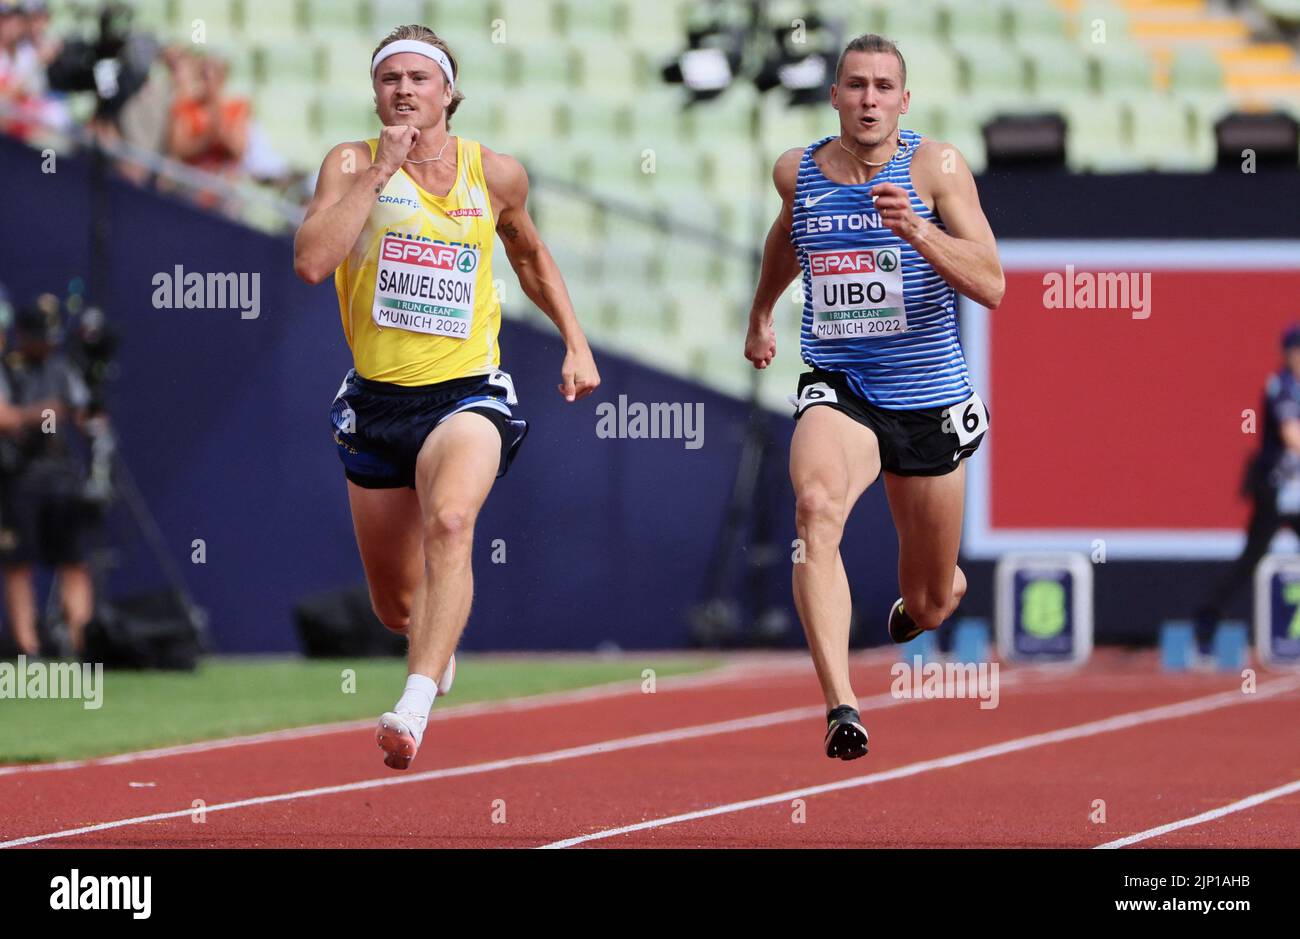 Athletics - 2022 European Championships - Olympiastadion, Munich, Germany - August 15, 2022 Sweden's Fredrik Samuelsson and Estonia's Maicel Uibo in action during the Men's Decathlon 100m - Heats REUTERS/Wolfgang Rattay Stock Photo